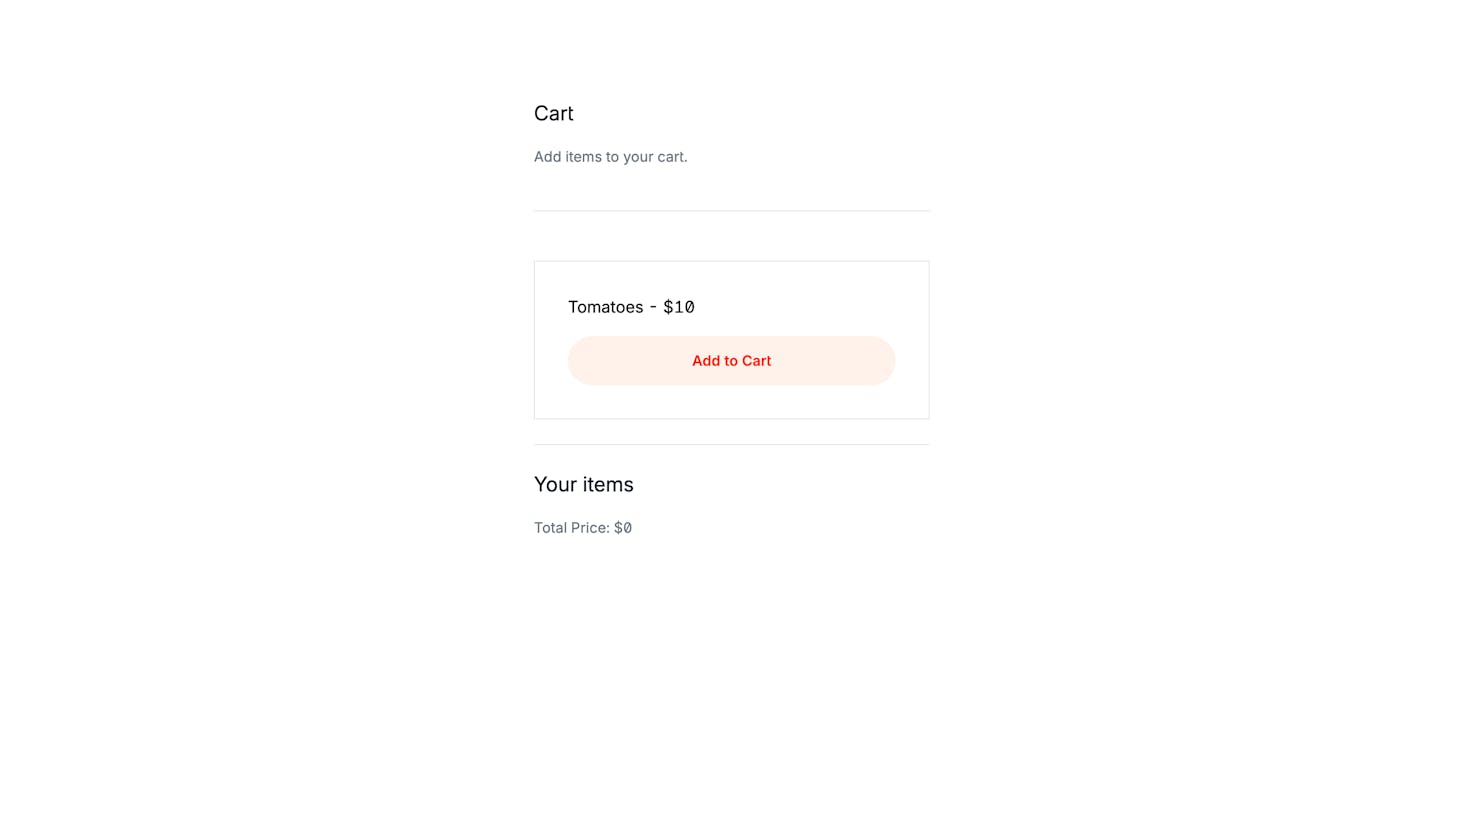 How to add items to your cart with Tailwind CSS and Alpinejs